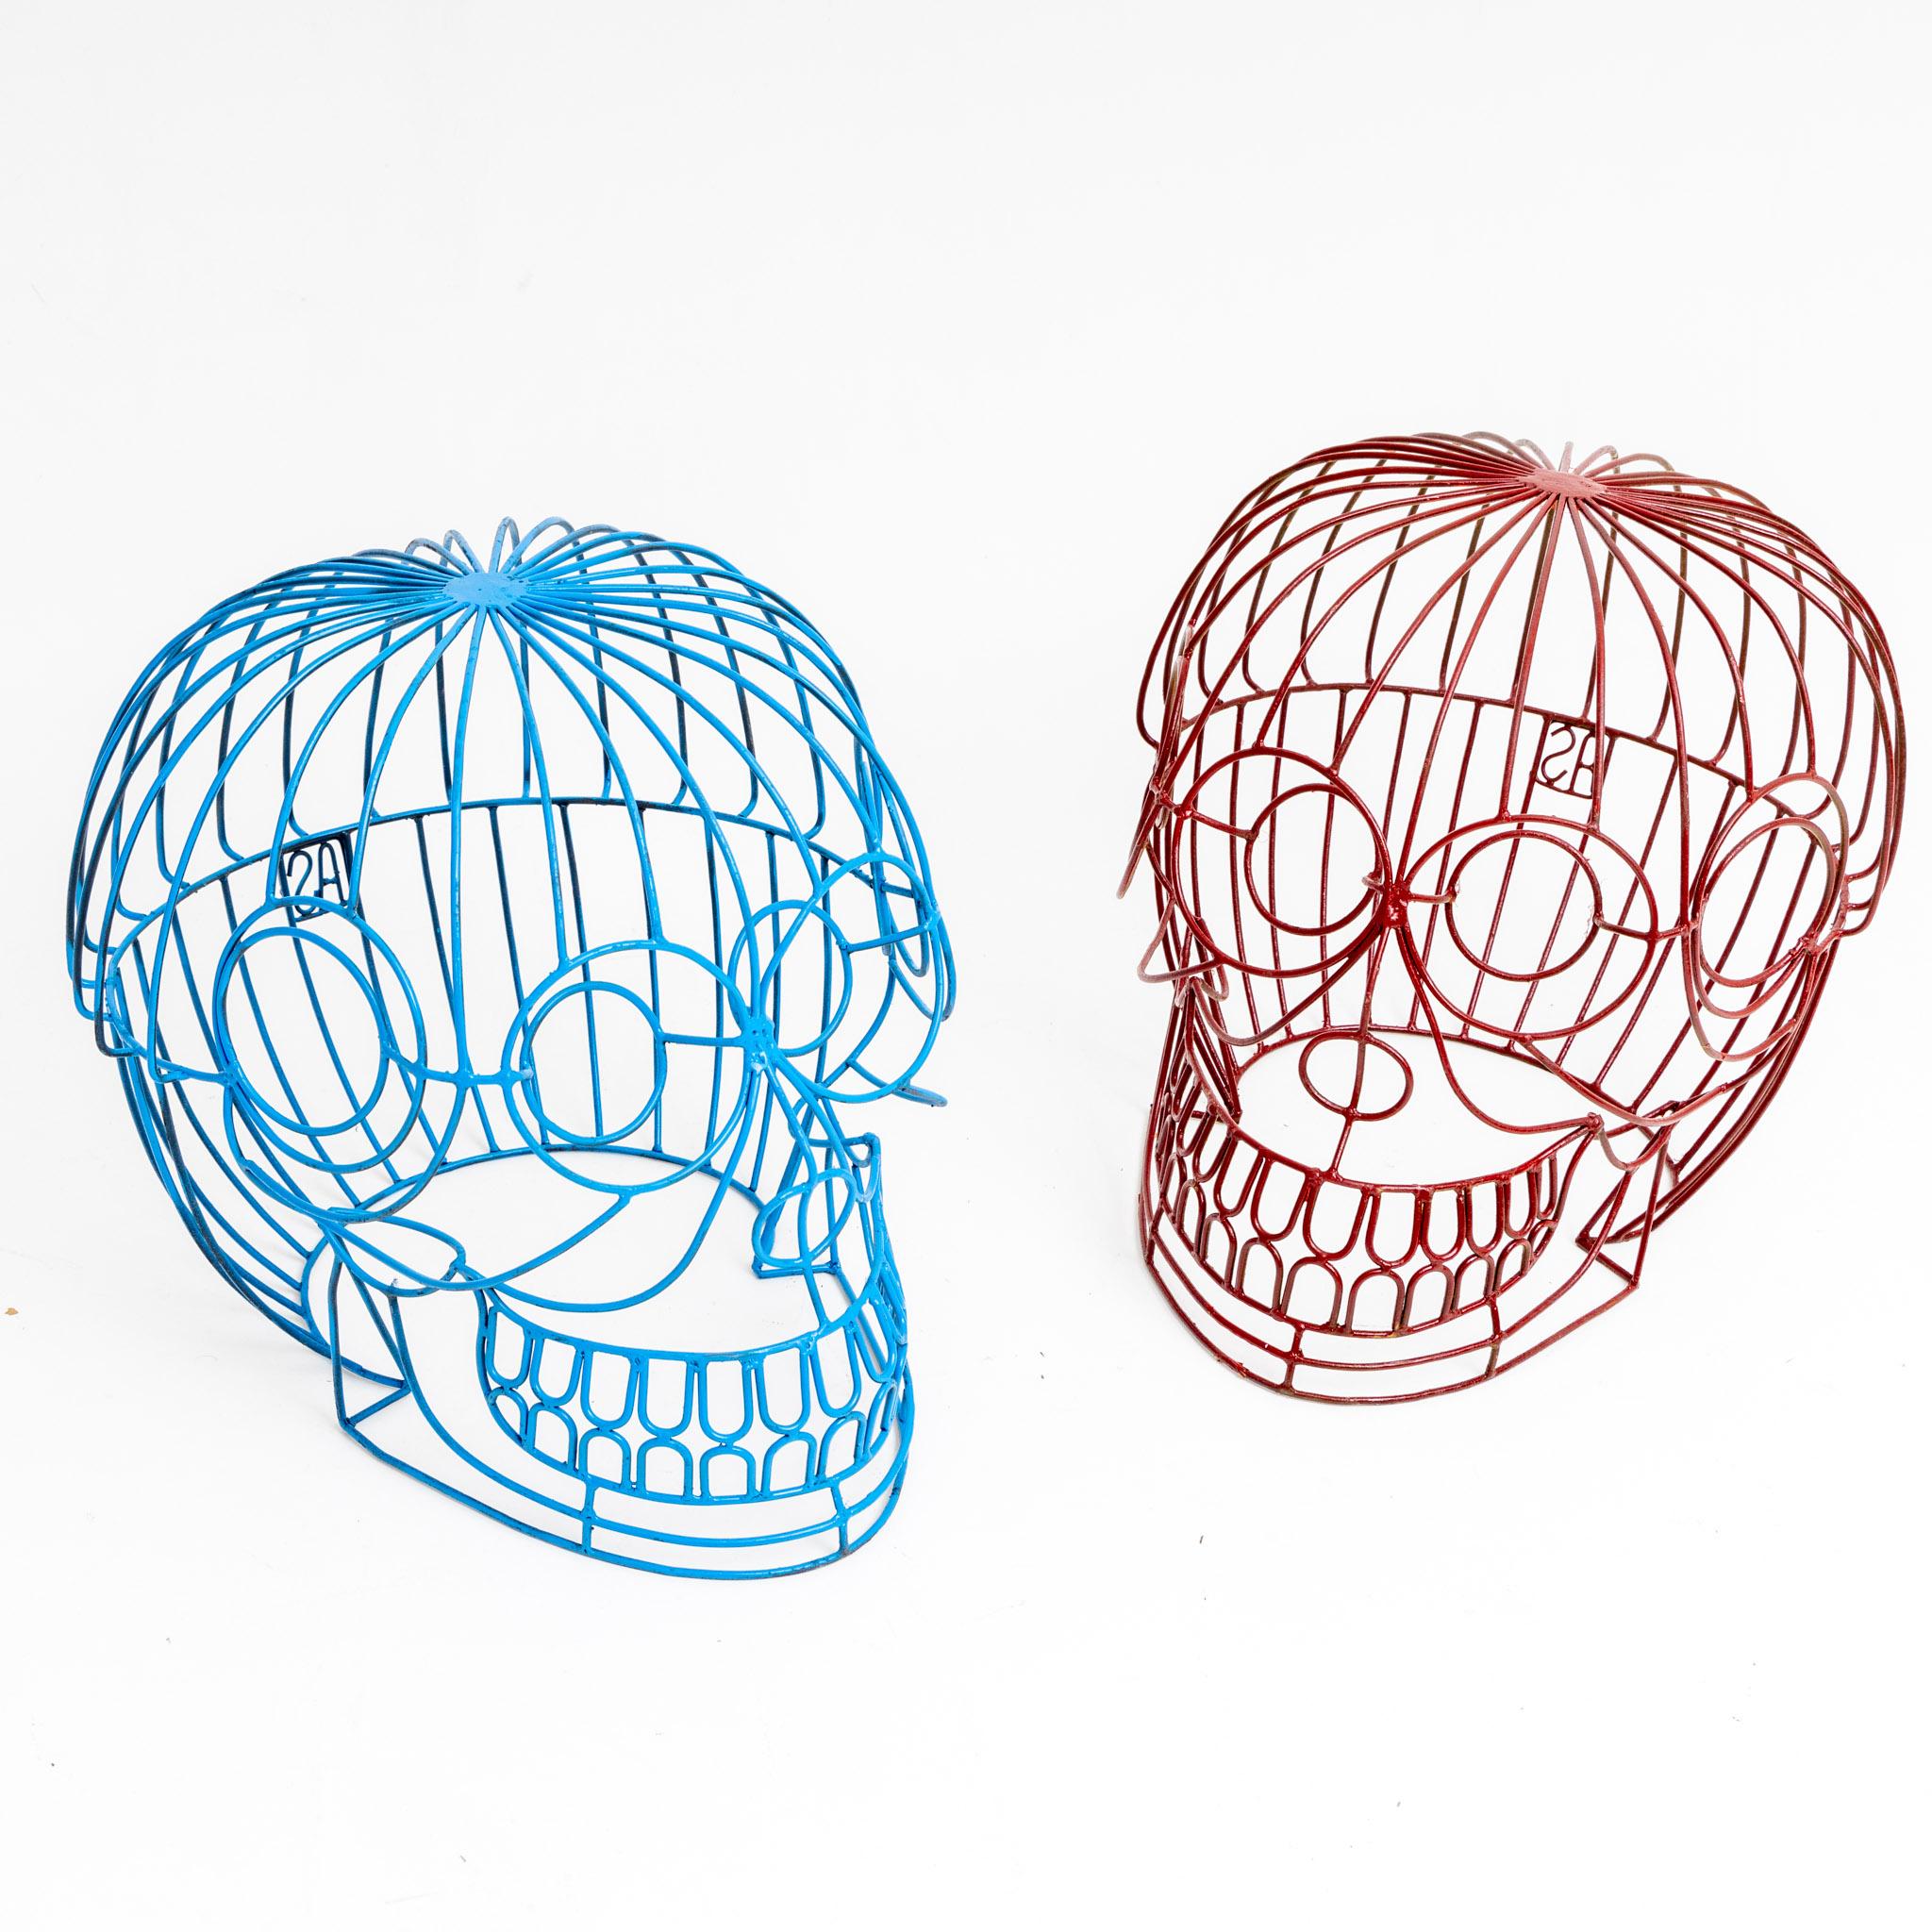 Pair of stools by Anacleto Spazzapan in the form of skulls made of metal rods individually welded together and painted blue and red, respectively. Monogram AS on the back.
As a designer, Anacleto Spazzapan (born 1943) considers himself in the